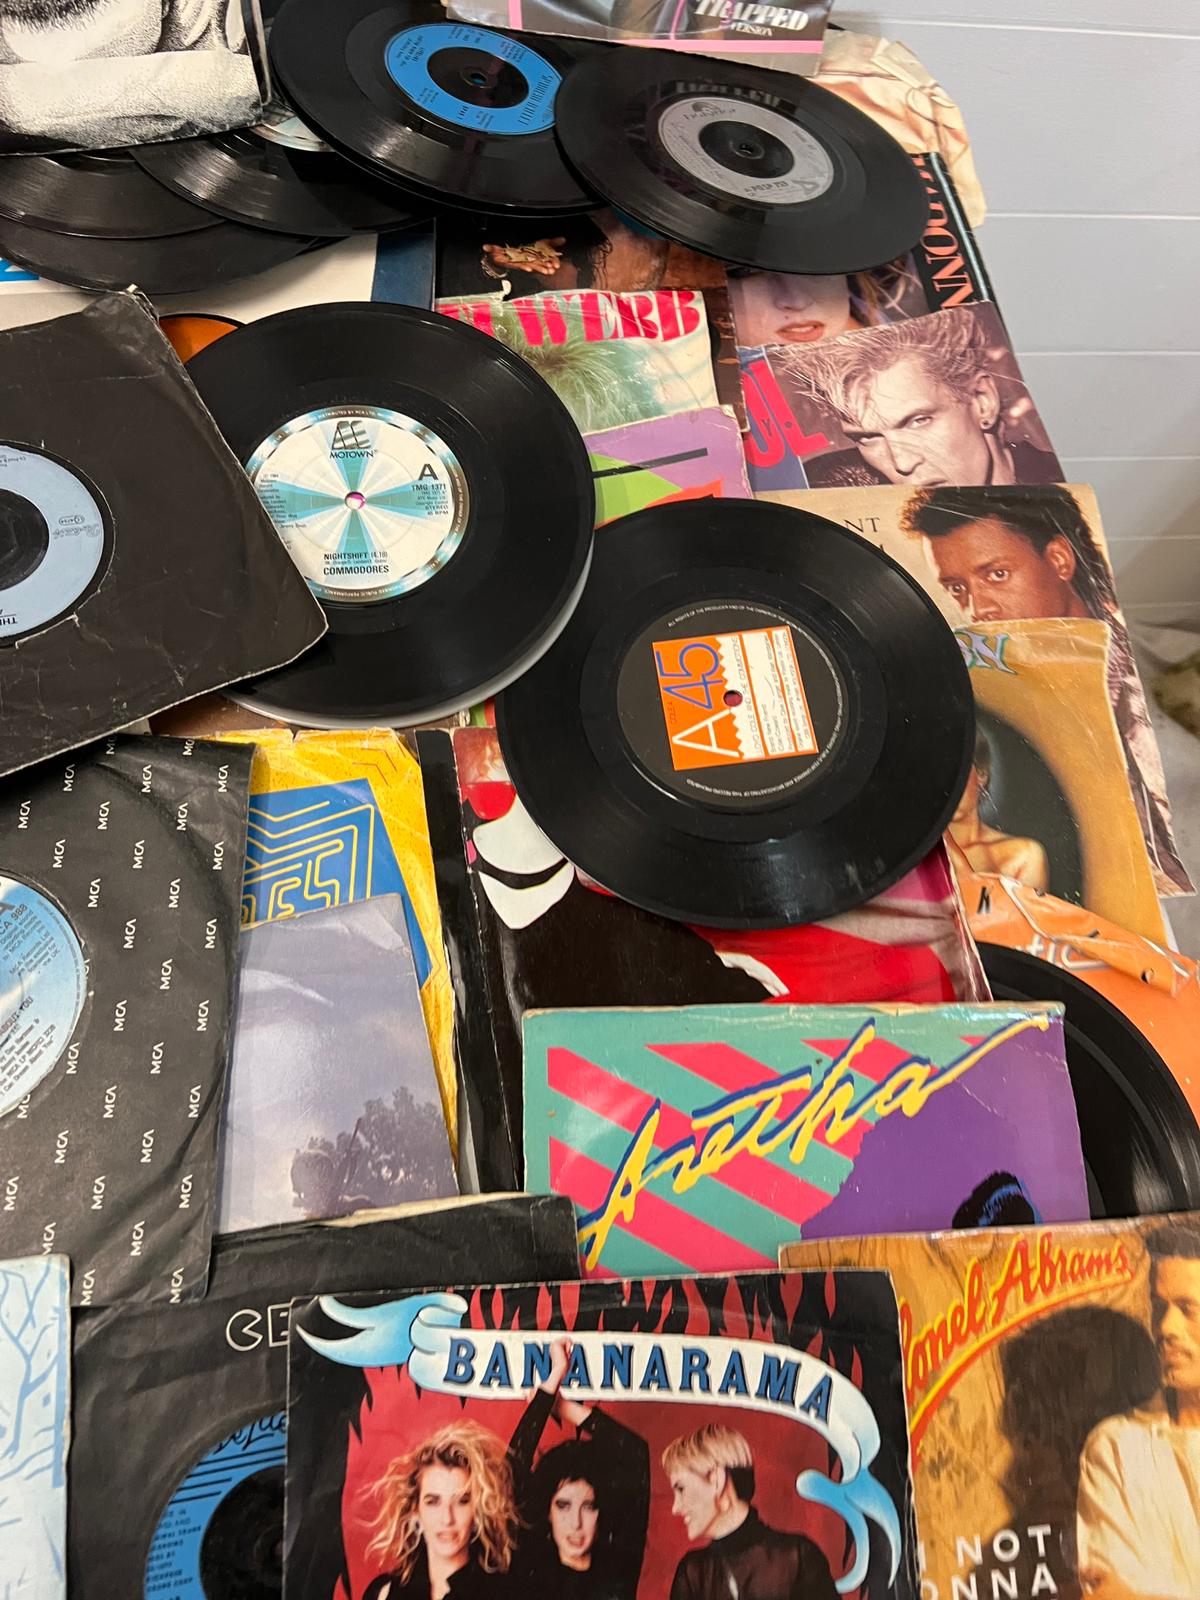 A large collection of records all 45's of 70's 80's, pop, rock and soul music approx 200 various - Image 3 of 8